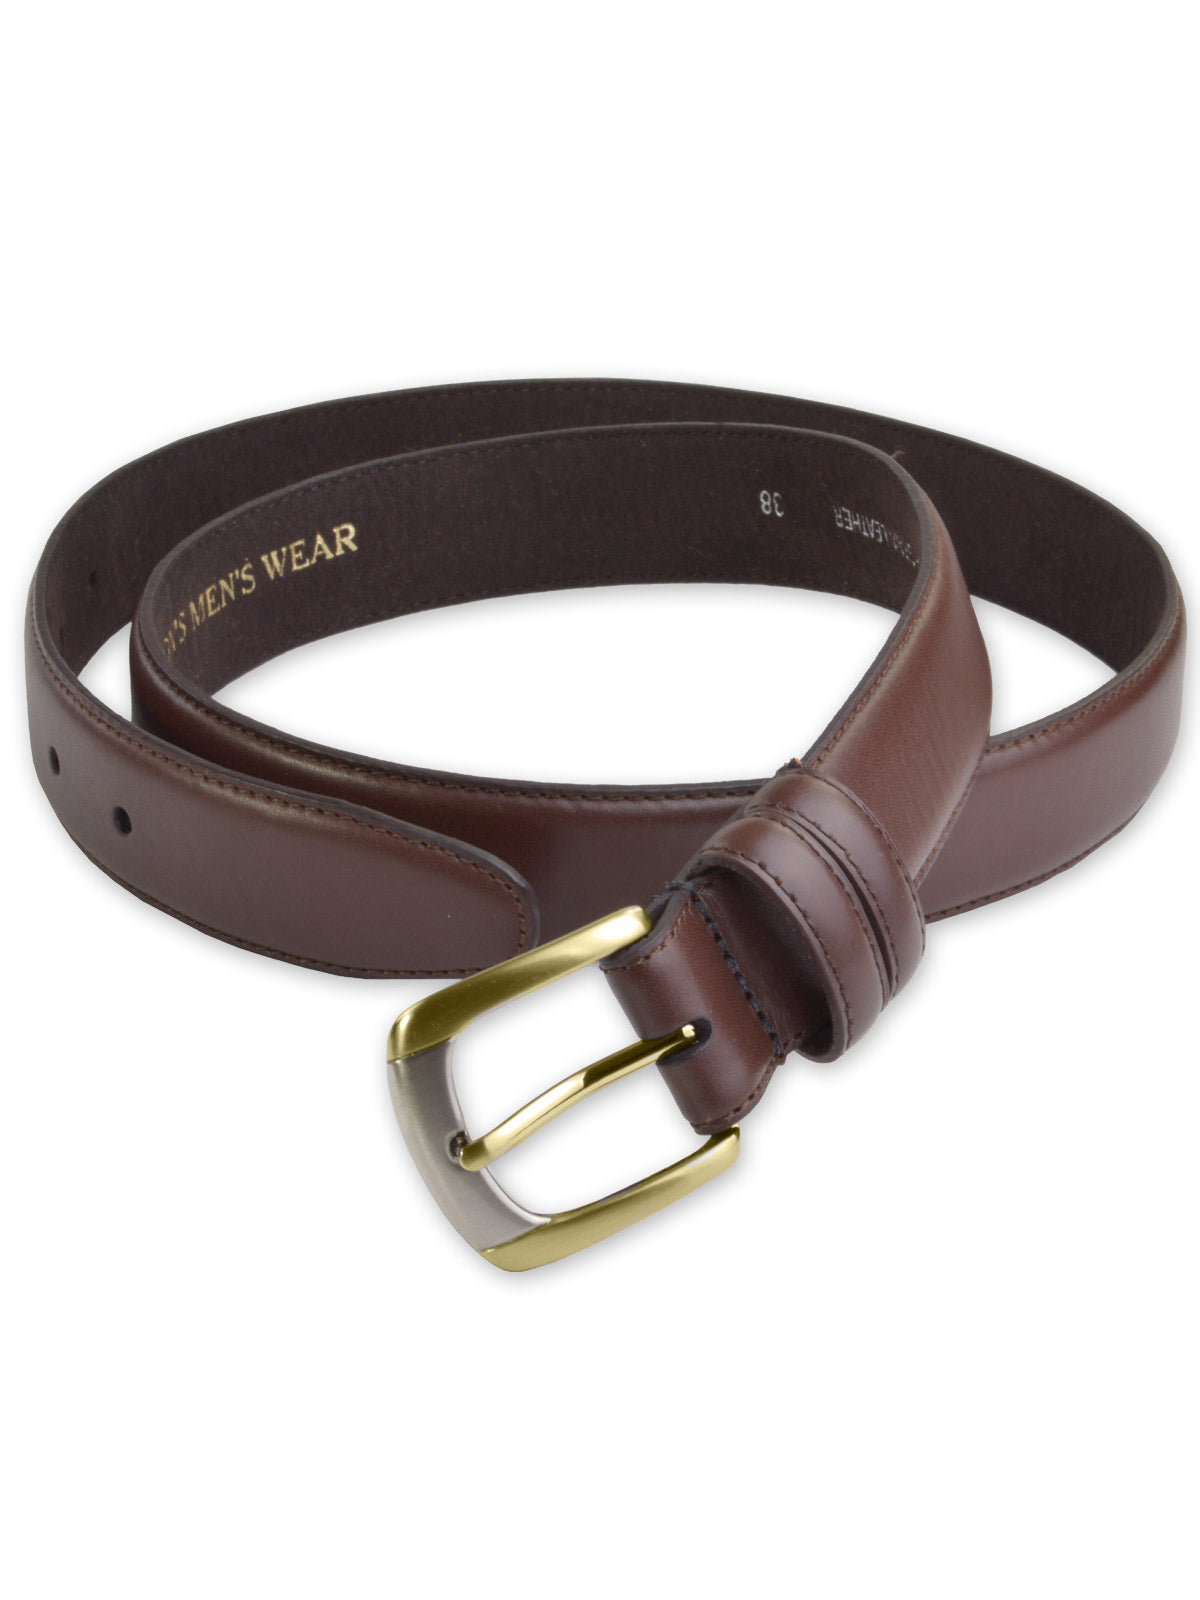 Marc Wolf Leather Dress Belts - Two Tone Buckle (4 - 0